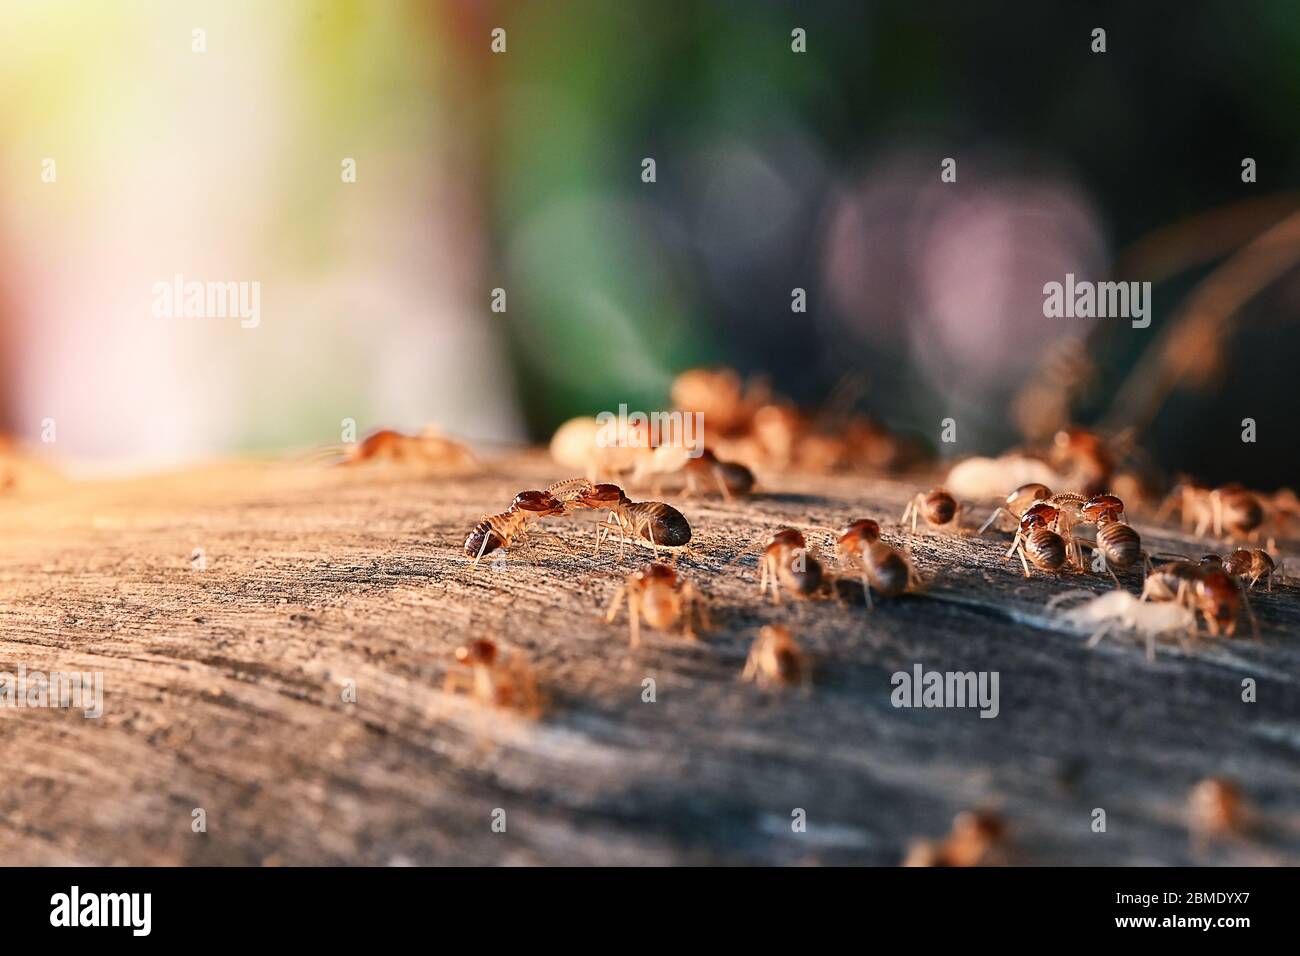 Colony Of Termite, Termites eat wood ,termites that come out to the surface after the rain fell. termite colonies mostly live below the surface of the Stock Photo